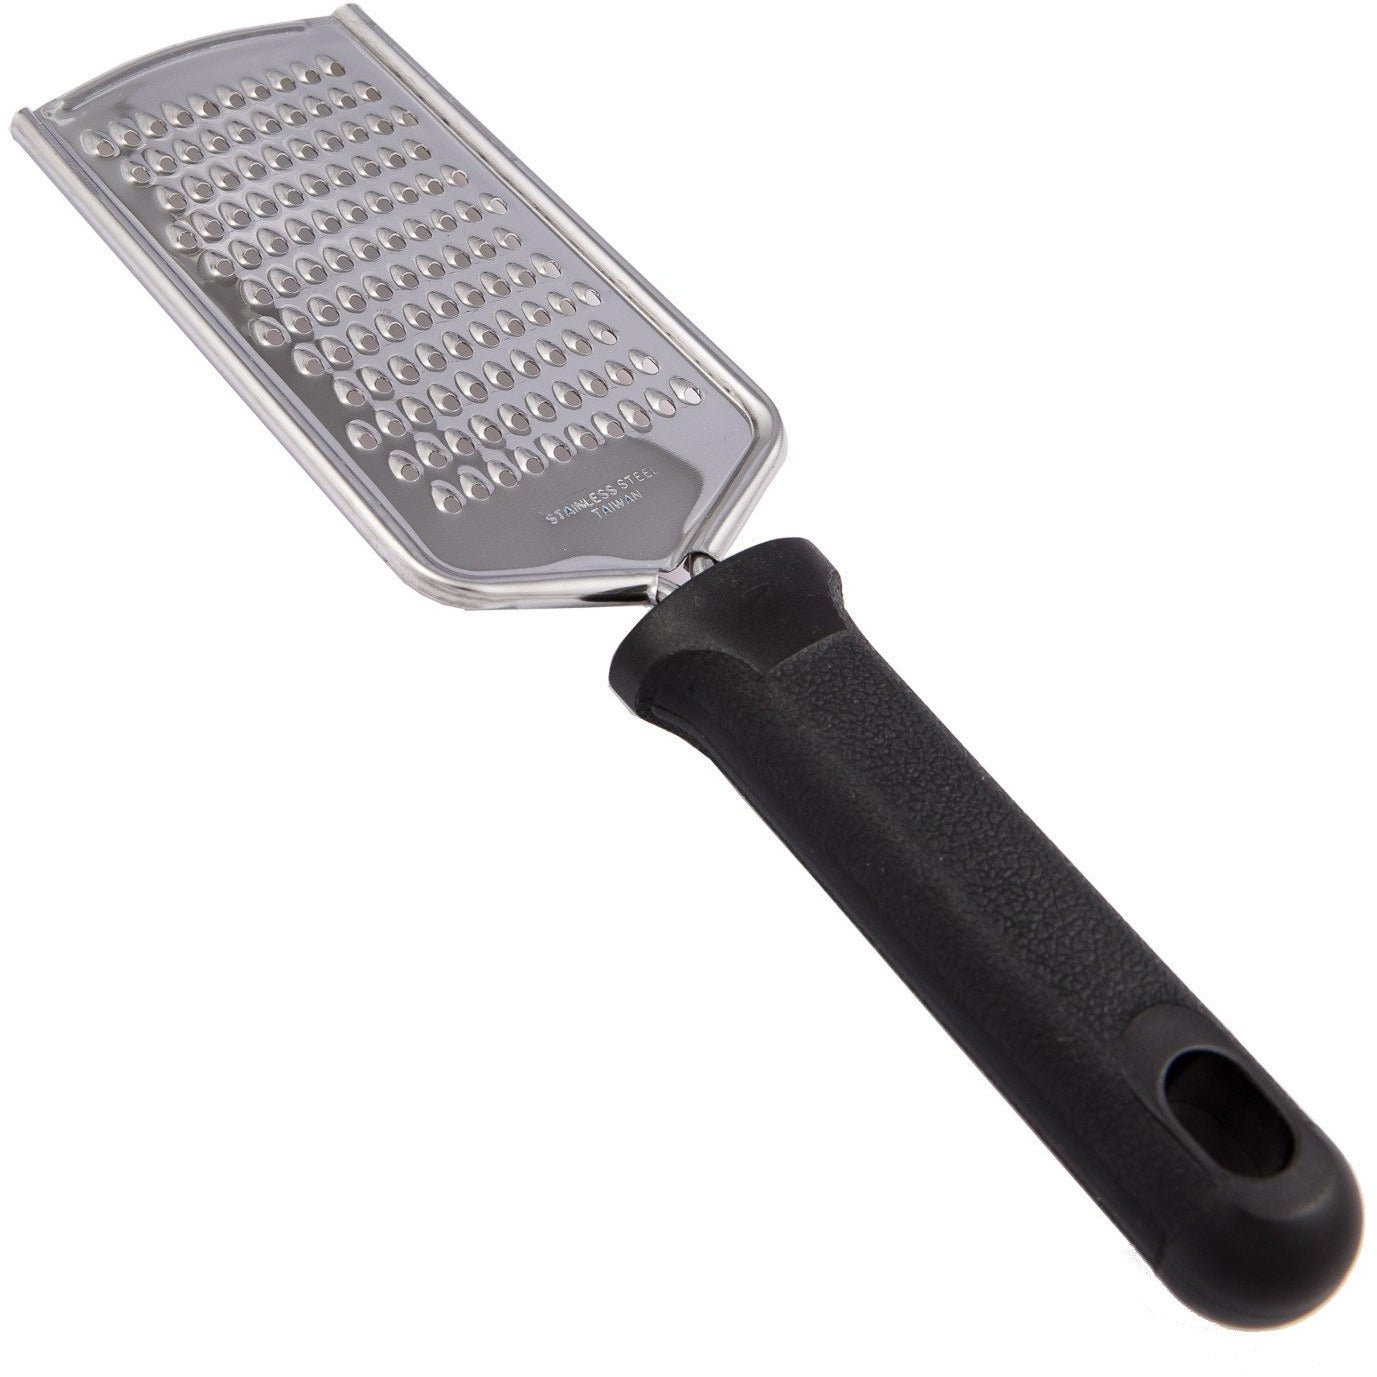 Superior Chef Flat Fine Slot Grater, Stainless Steel 120 Slot 4 inch inch Durable Grater for Cheese and Vegetables, by Peppermate